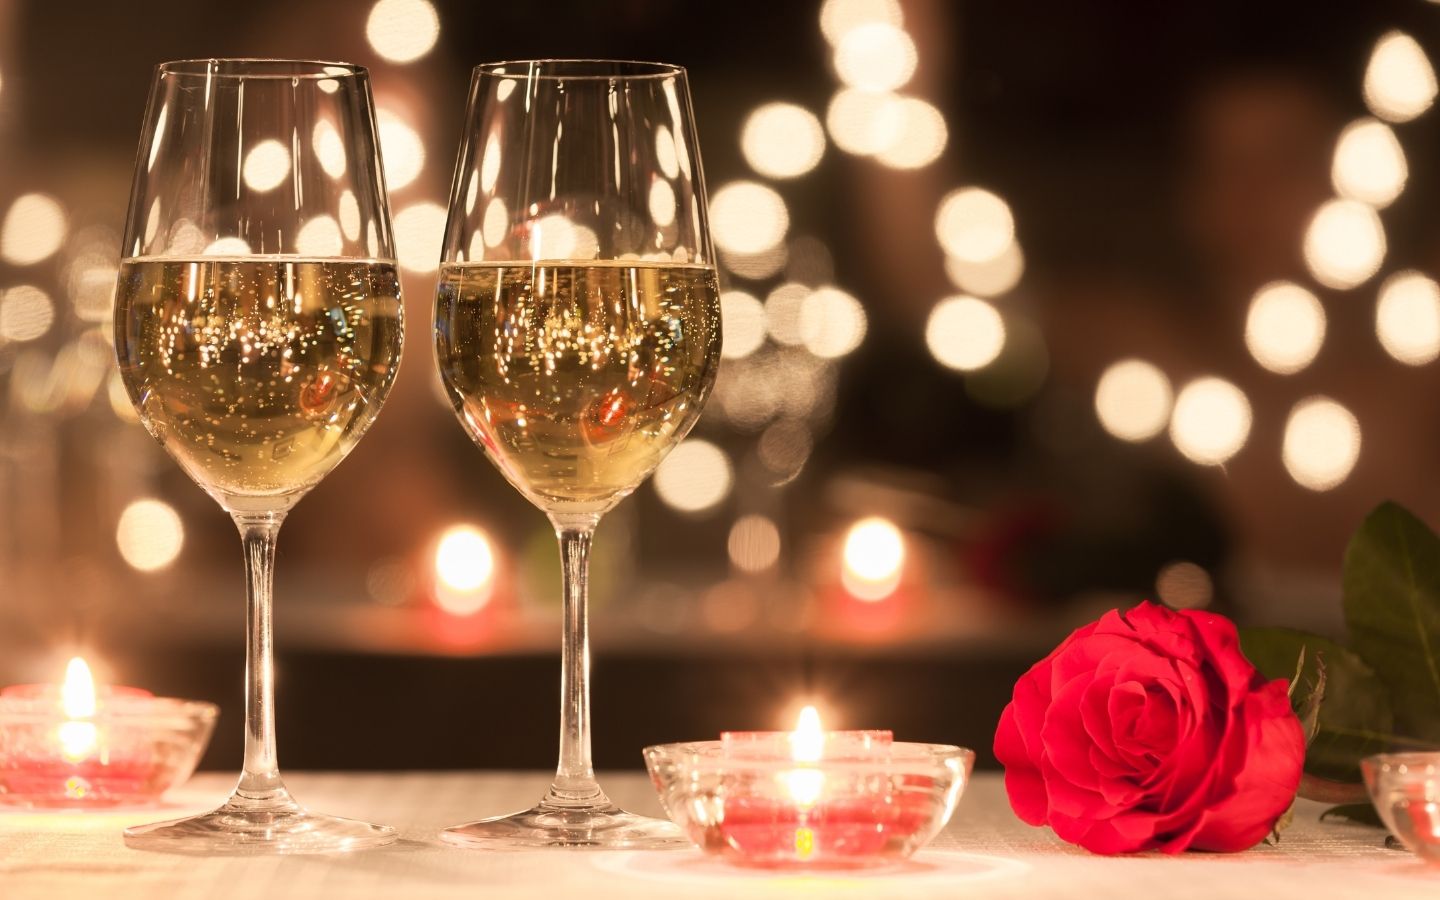 Romantic table set with wine glasses, candles, a red rose and twinkling lights in the background